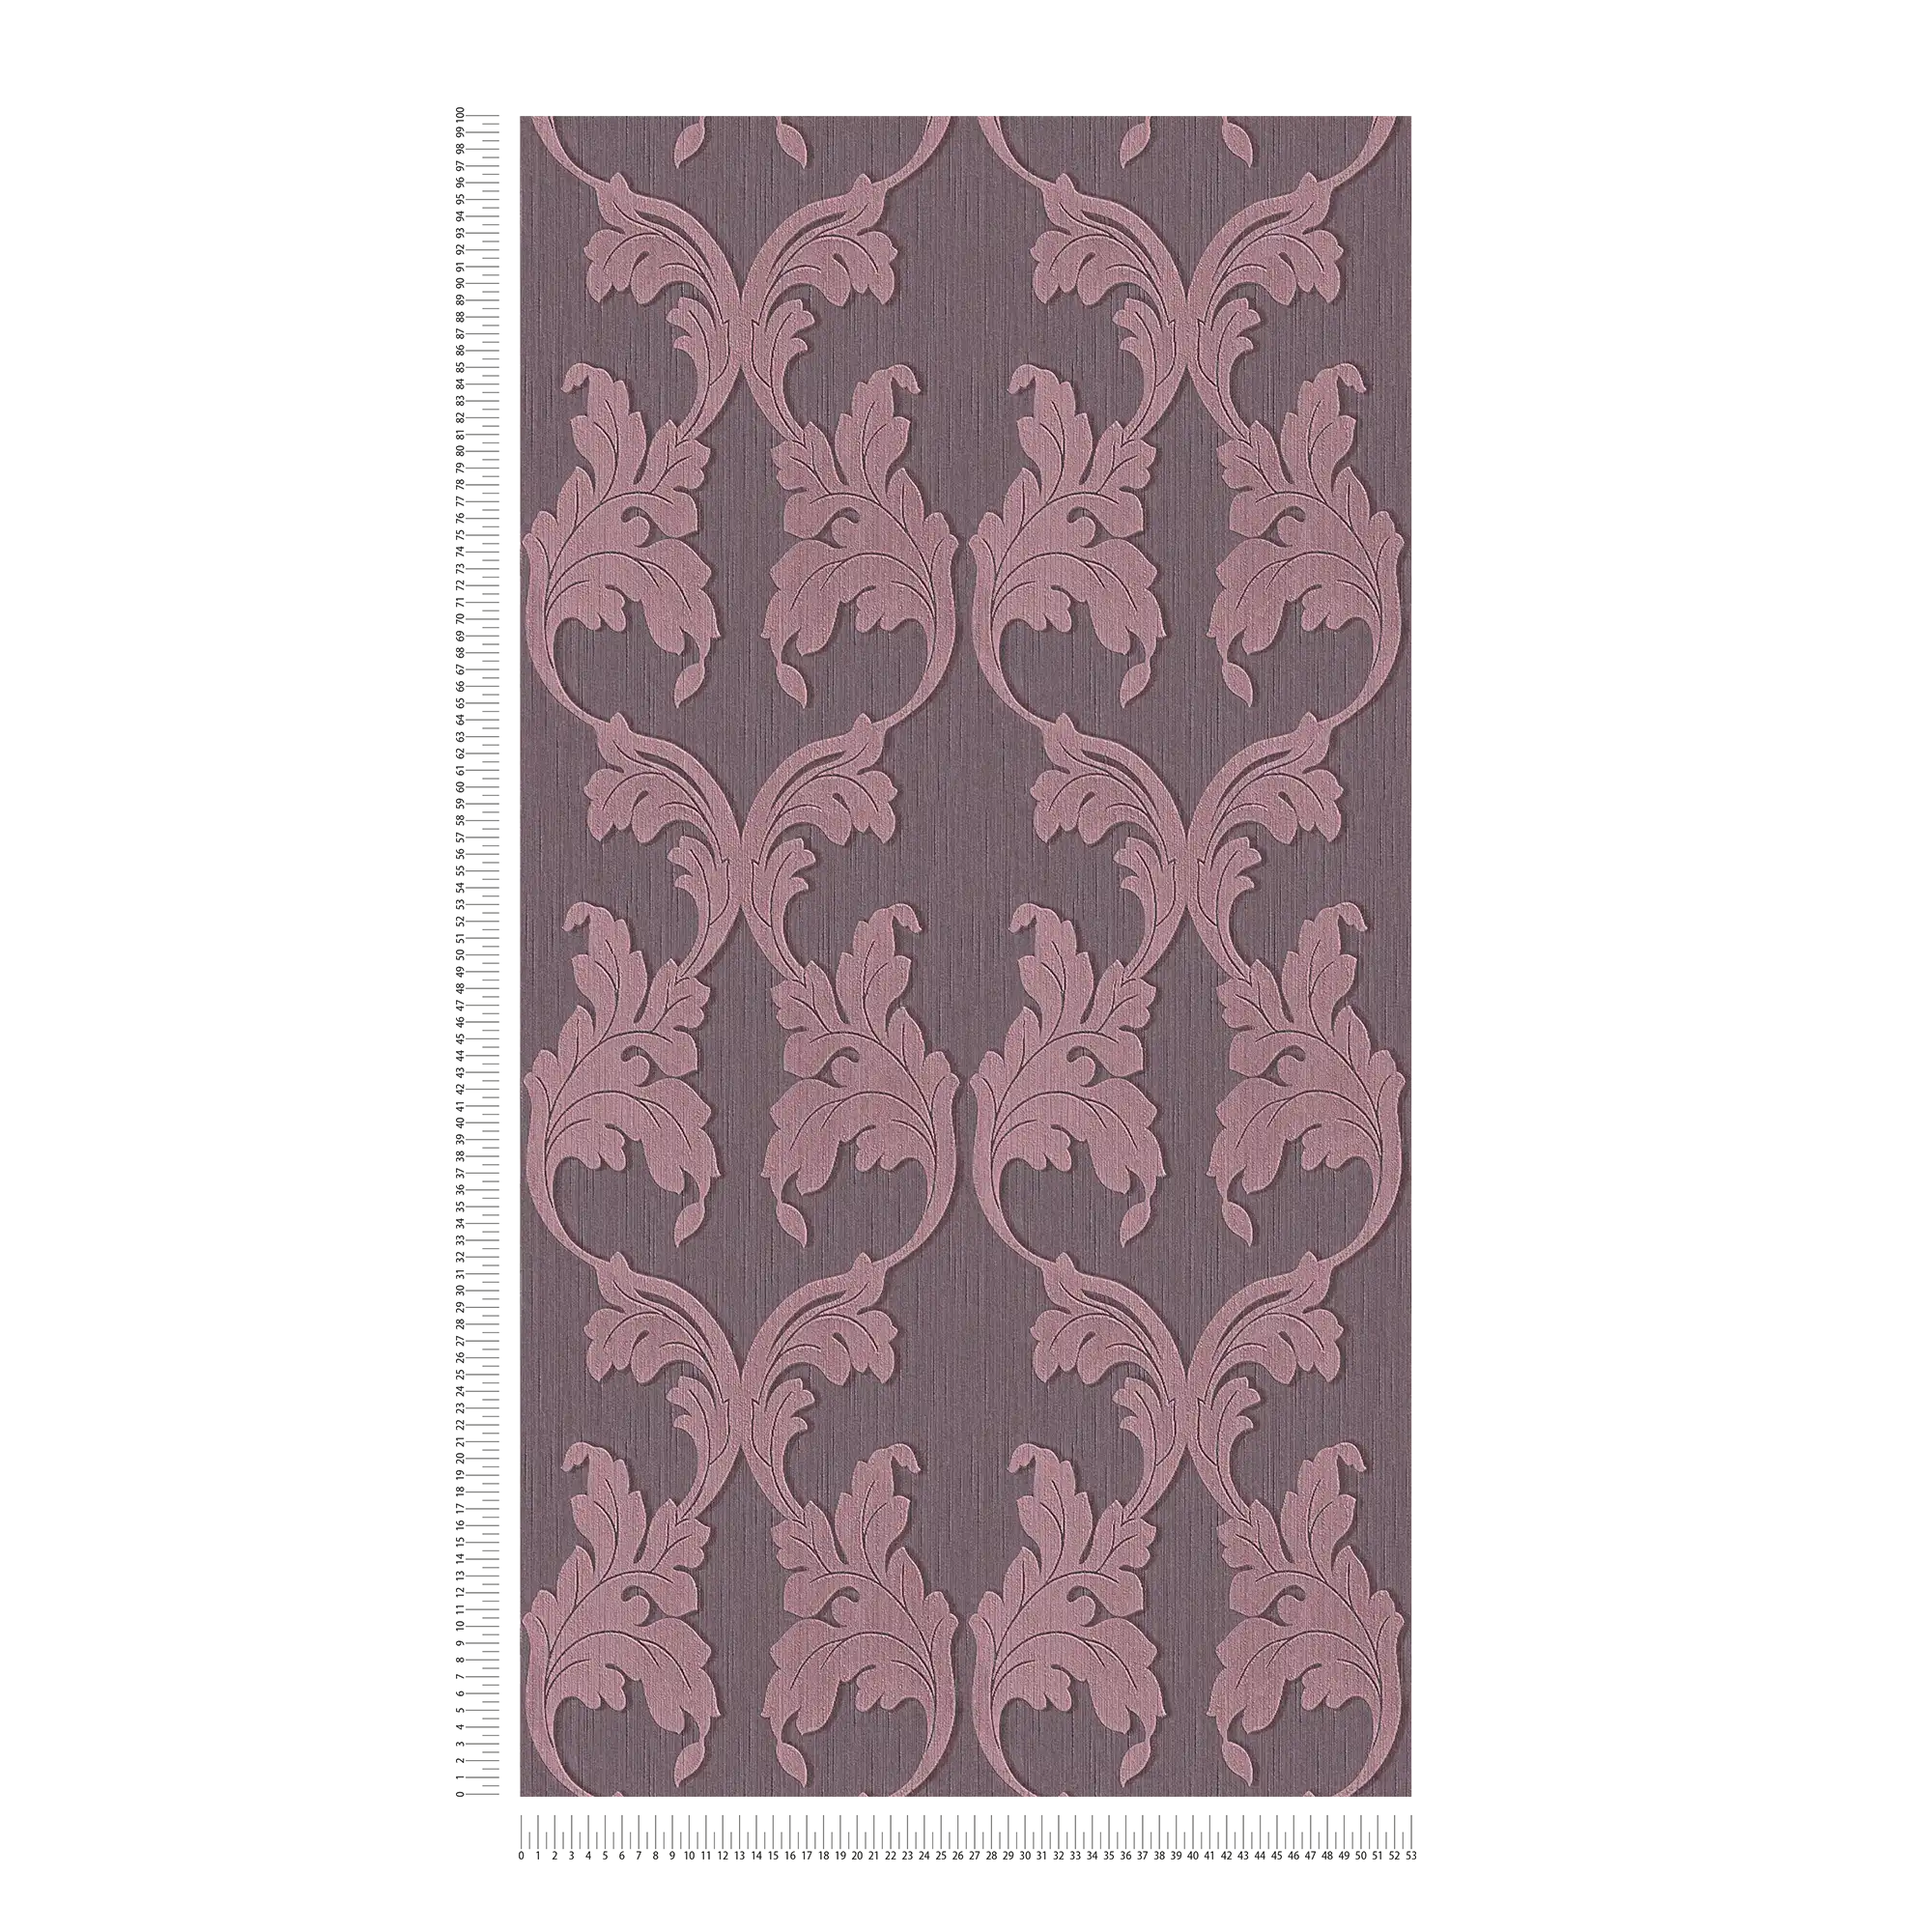             Textile wallpaper with baroque tendrils - purple
        